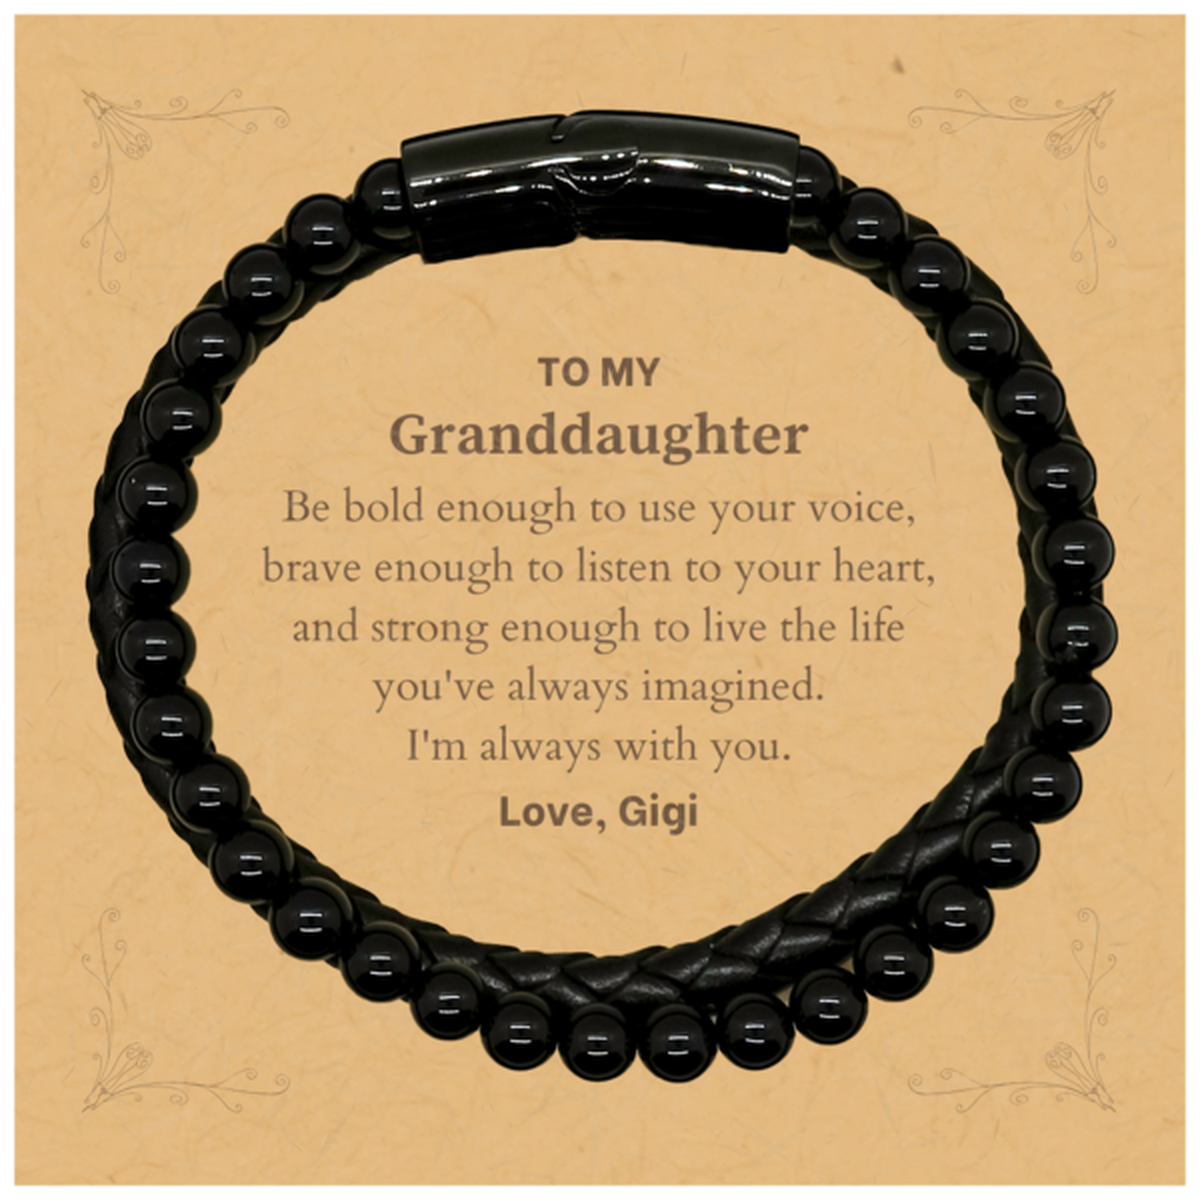 Keepsake Granddaughter Stone Leather Bracelets Gift Idea Graduation Christmas Birthday Granddaughter from Gigi, Granddaughter Be bold enough to use your voice, brave enough to listen to your heart. Love, Gigi